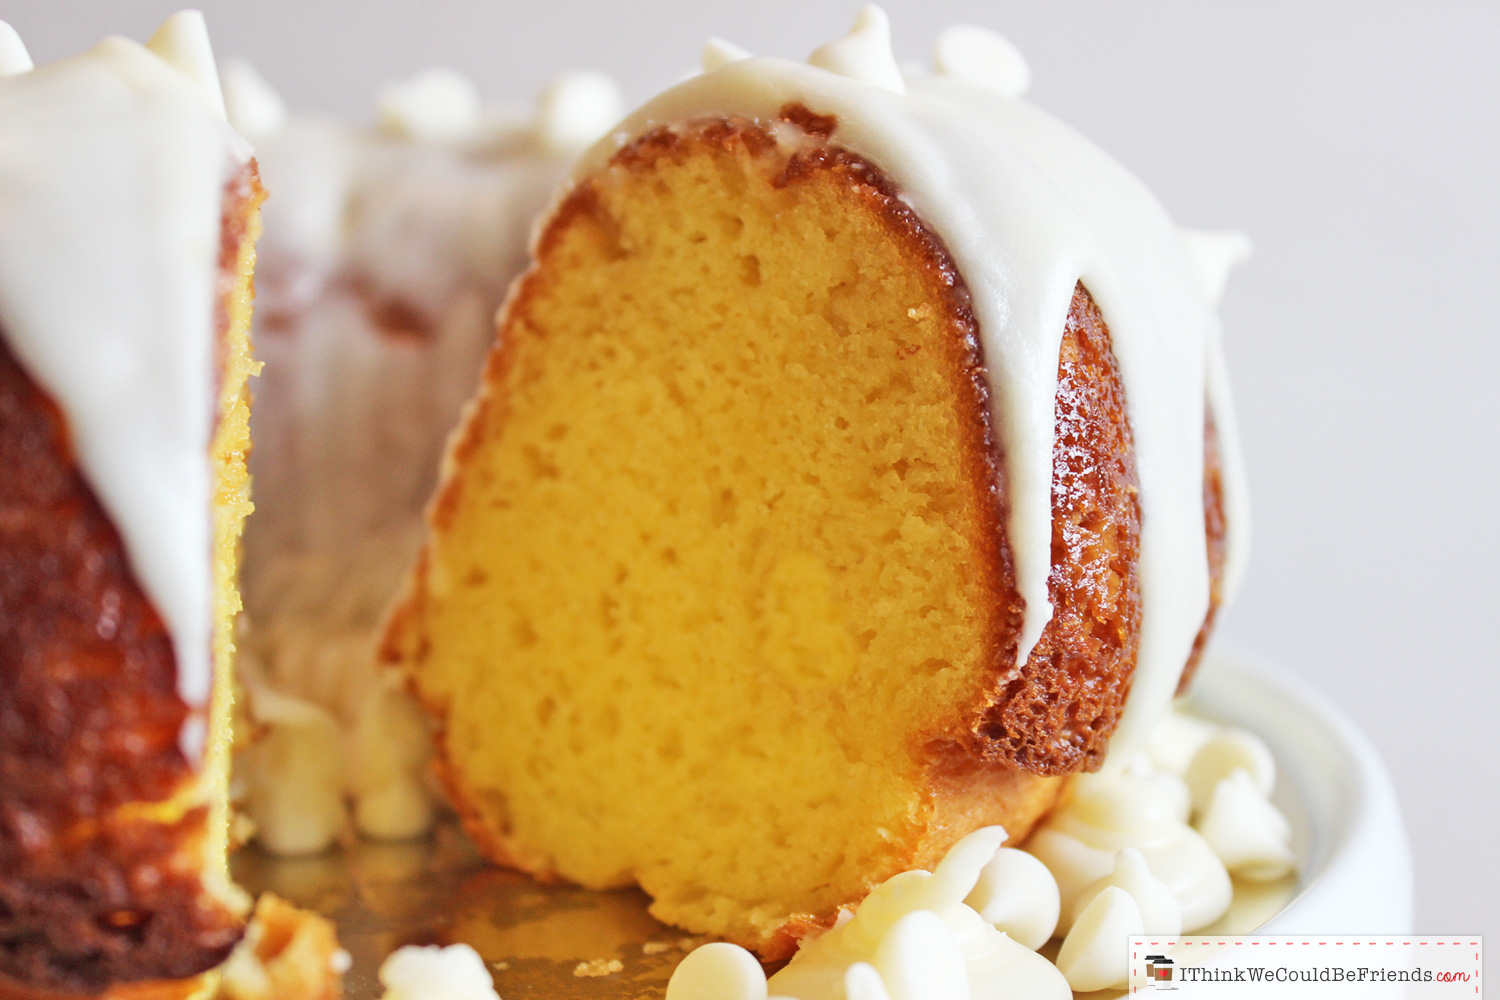 The Best White Chocolate Vanilla Bundt Cake starts with a yellow boxed 